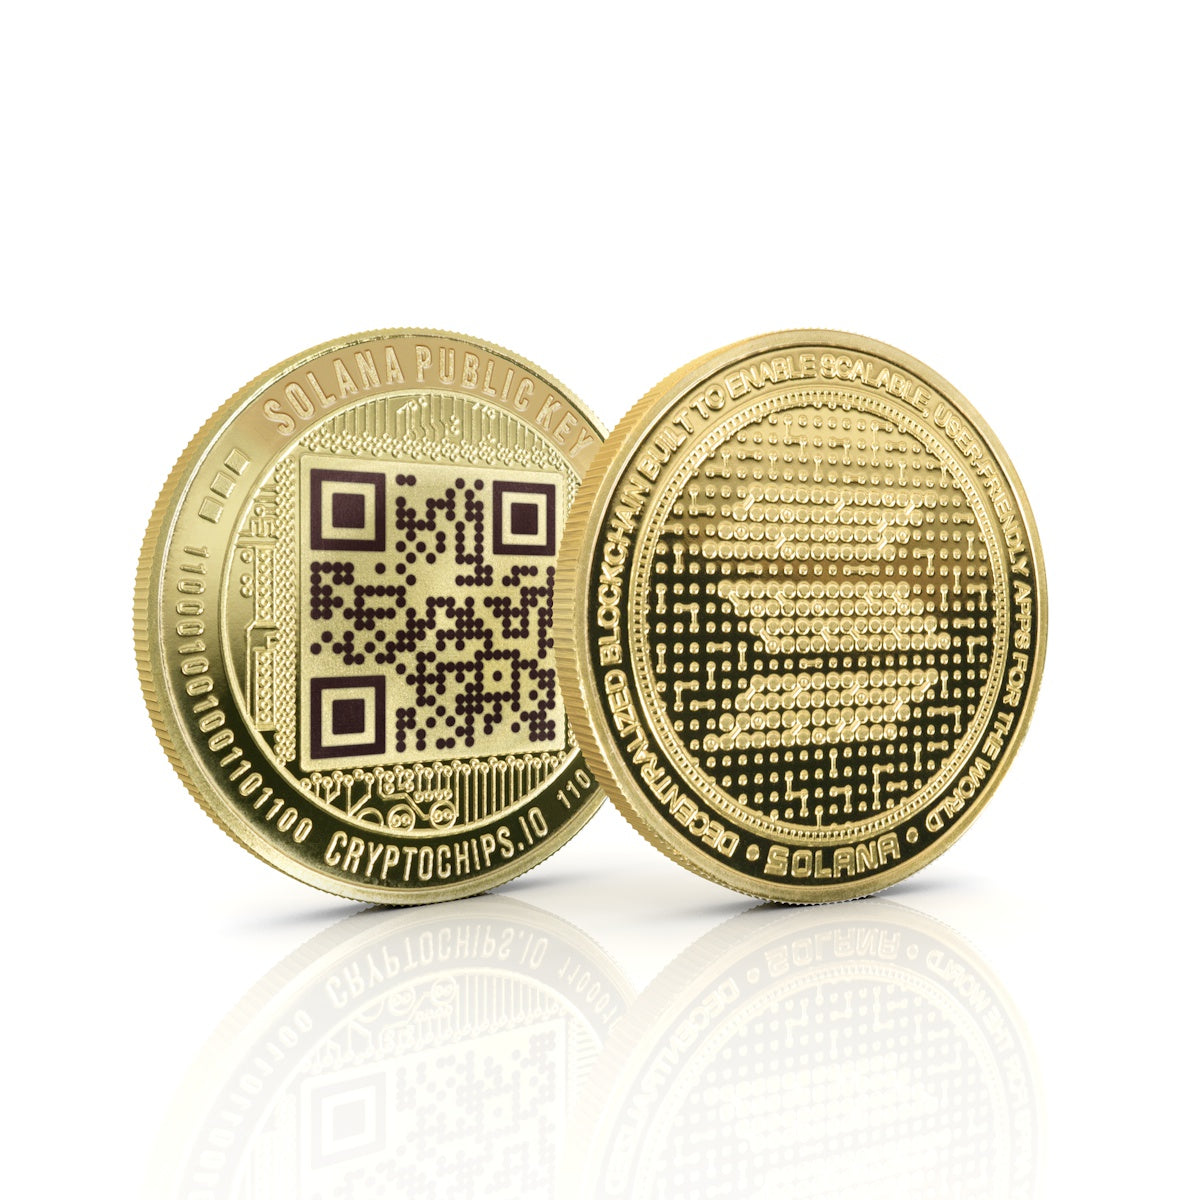 Cryptochips | QR Coins Physical Crypto Coin. Collectable cryptocurrency merch you can hodl